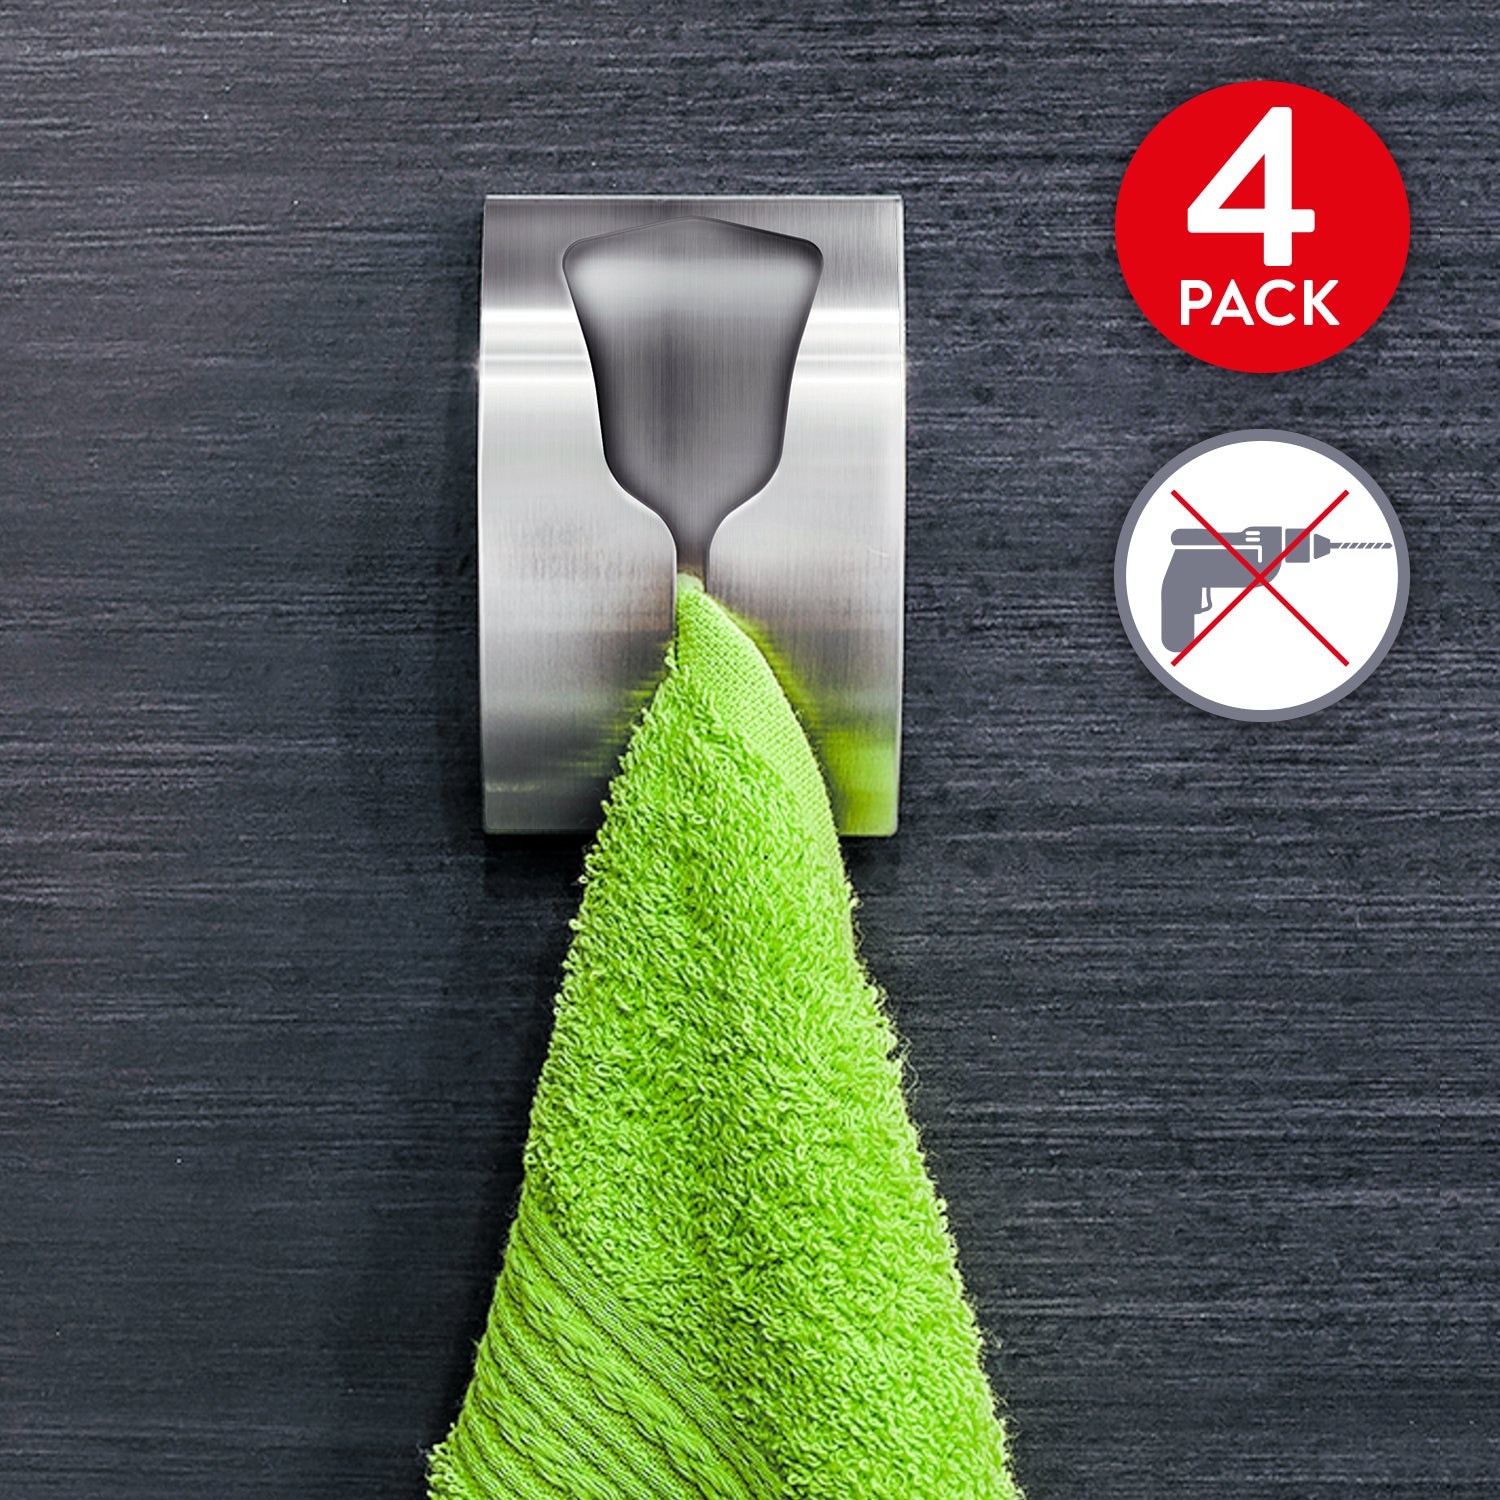 Pack of 4 Self Adhesive Tea Towel Holder, Towel Rail for Bathroom and Kitchen